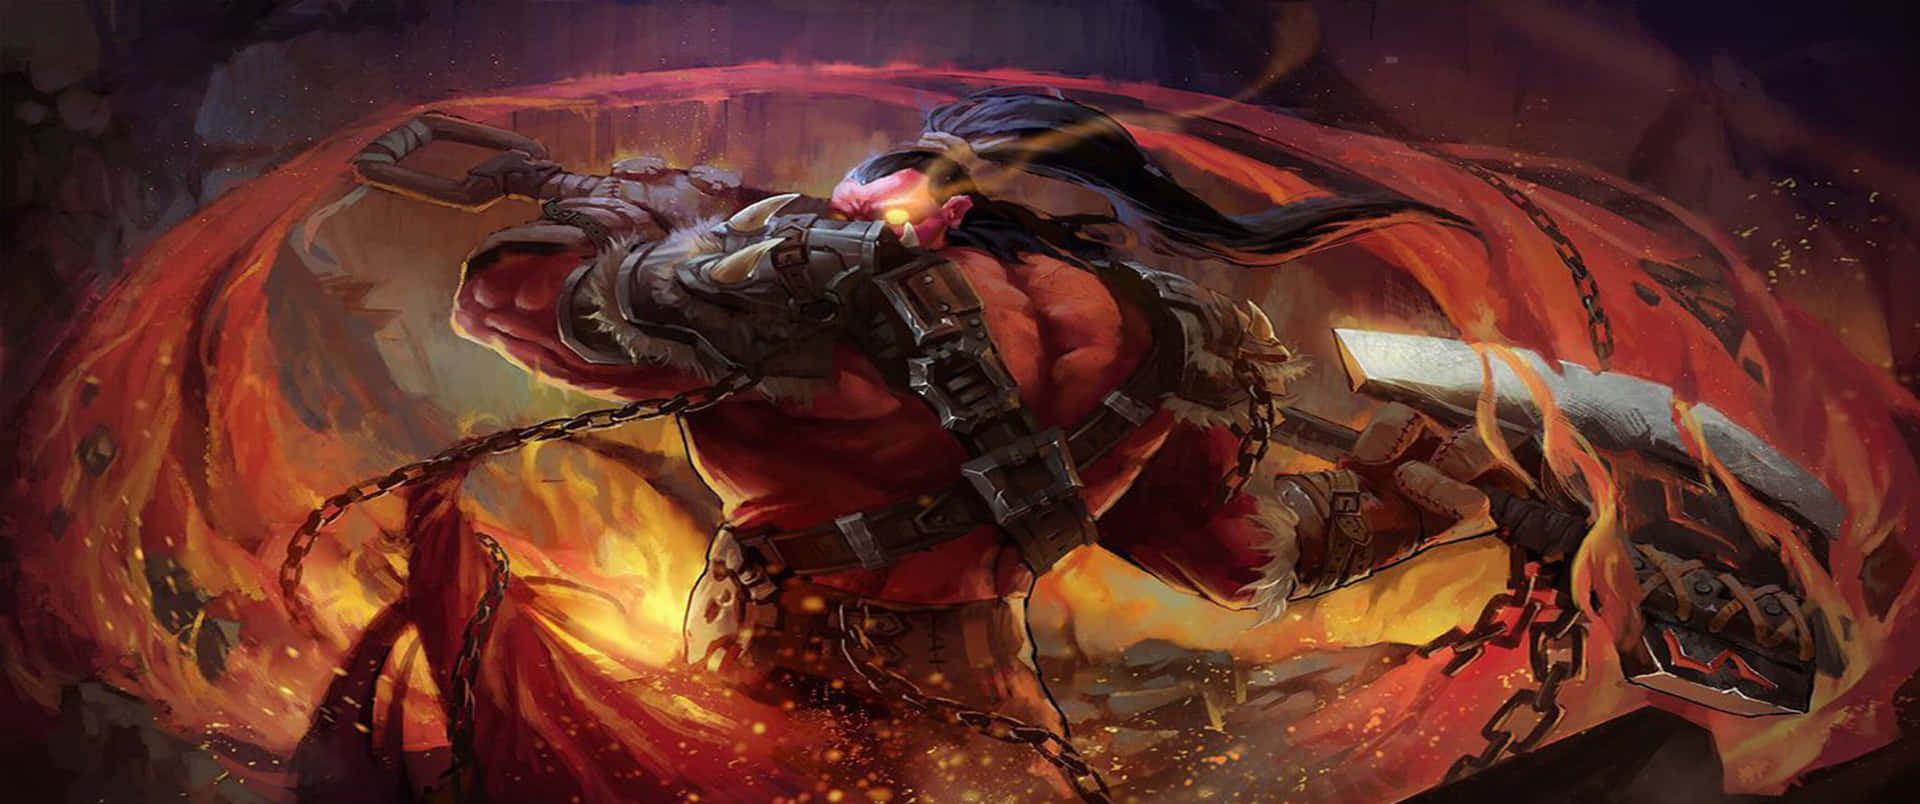 Hearthstone fans rejoice! Step into the arena with this epic 3440x1440p background.